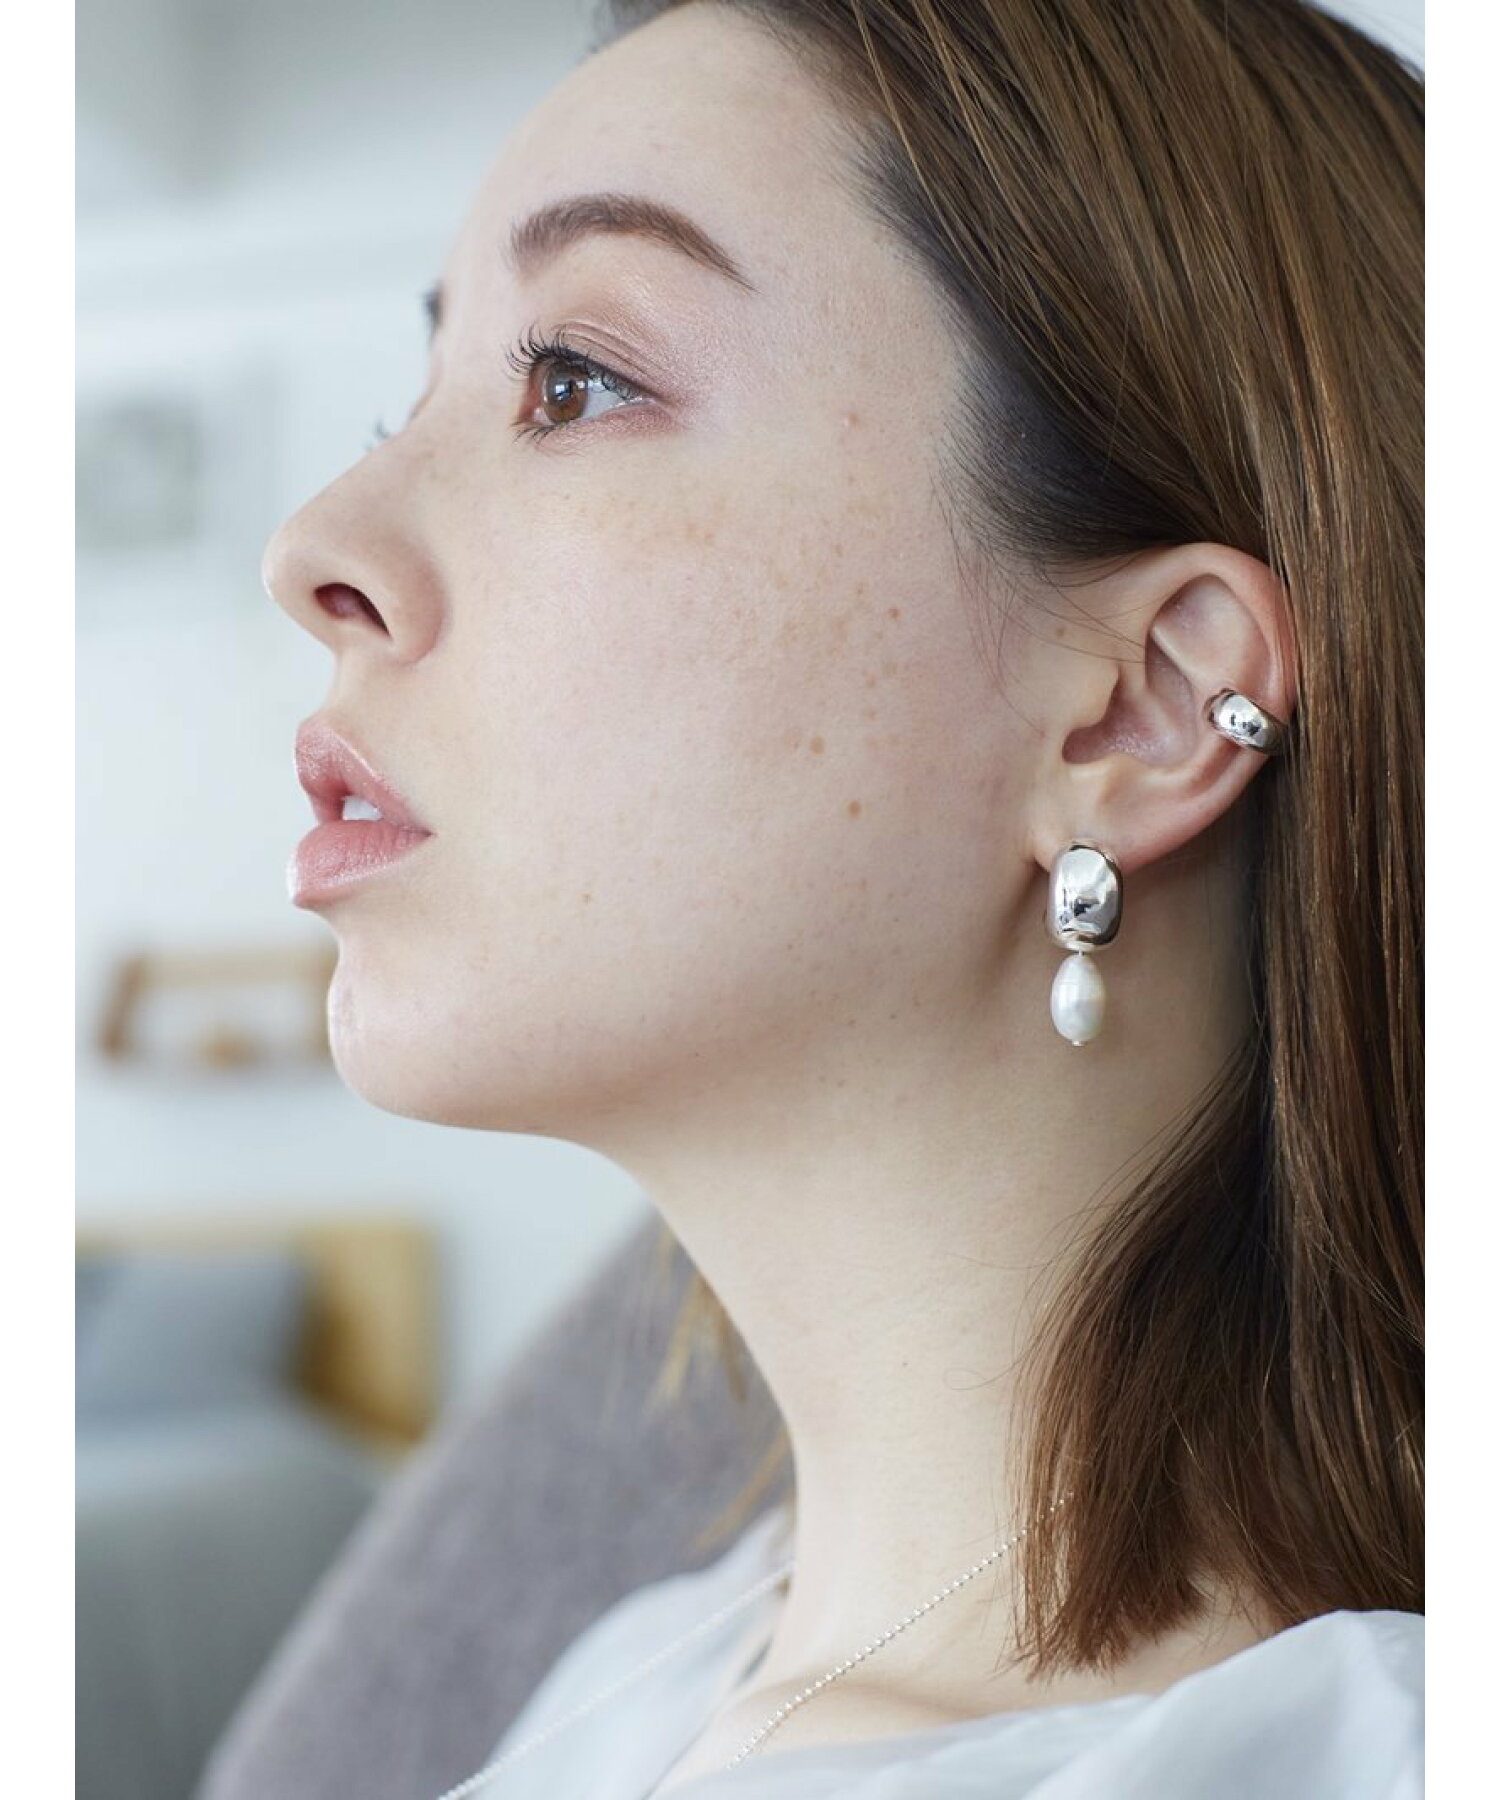 Nothing And Others/Freshwaterpearl Ear Set